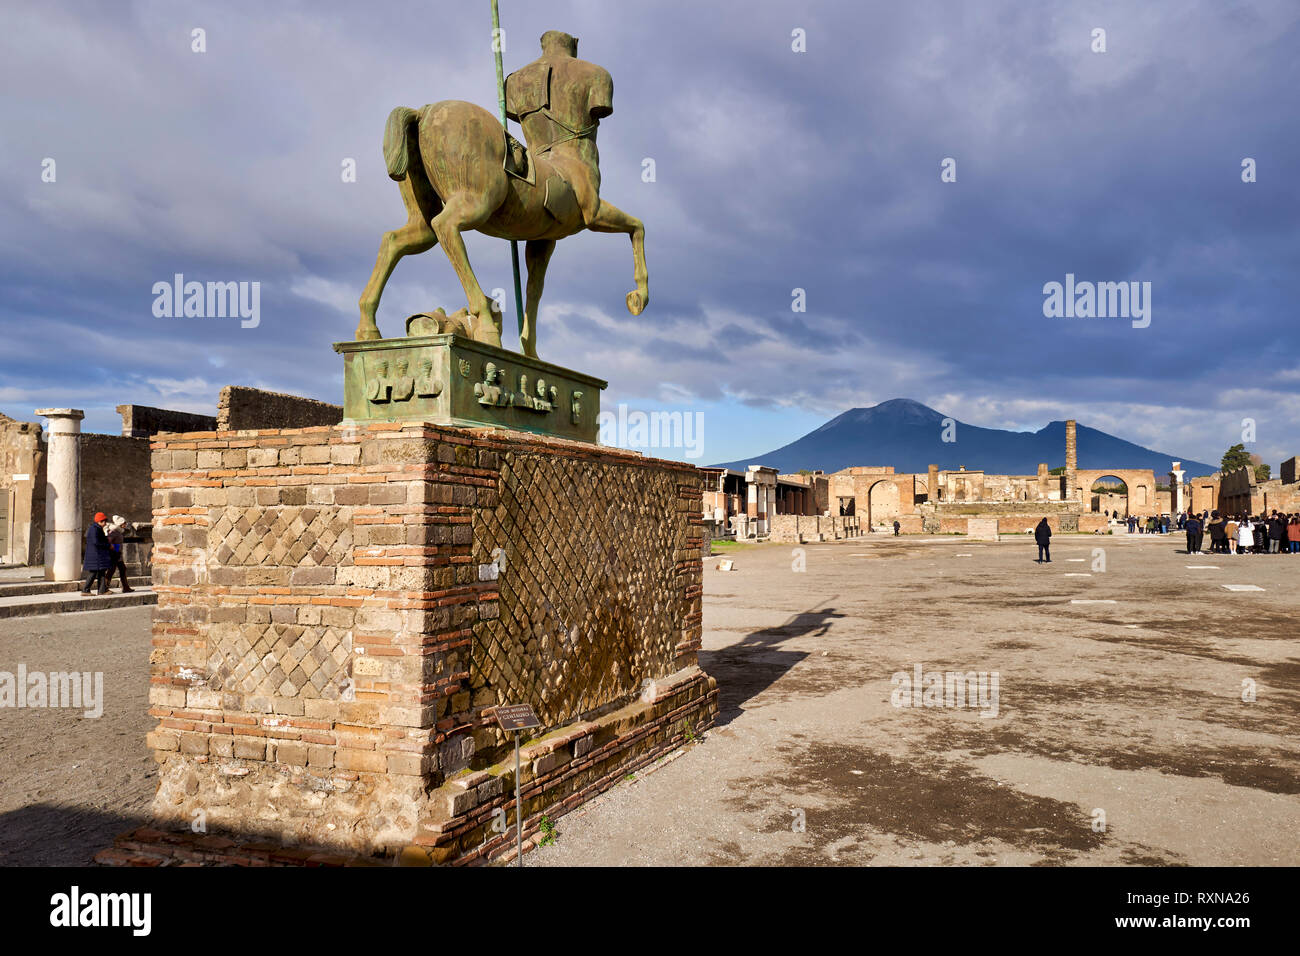 Naples Campania Italy. Pompeii was an ancient Roman city near modern Naples in the Campania region of Italy, in the territory of the comune of Pompei. Stock Photo